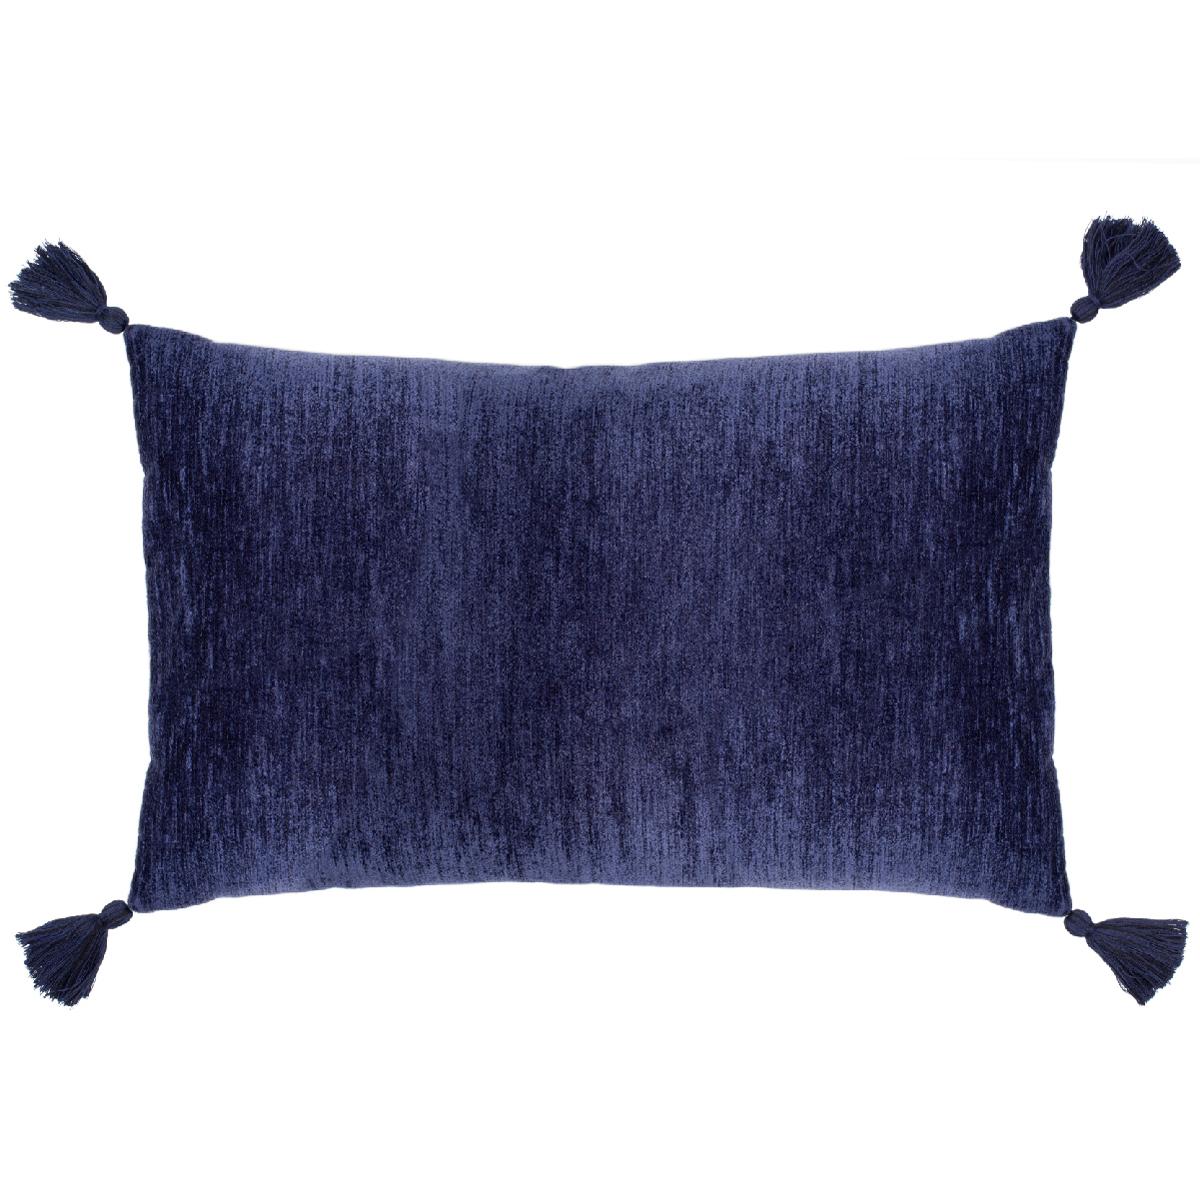 COLOUR: Blue With Blue Tassels
FRONT MATERIAL: 50% Viscose, 34% Polyester, 16% Cotton Jacquard woven fabric
BACK MATERIAL: Chenille 
FILLER: Feather
STOCK SIZE: 35cm x 60cm (approx)
ORIGIN: Fabric produced in Turkey, cushions made in the UK

Here at